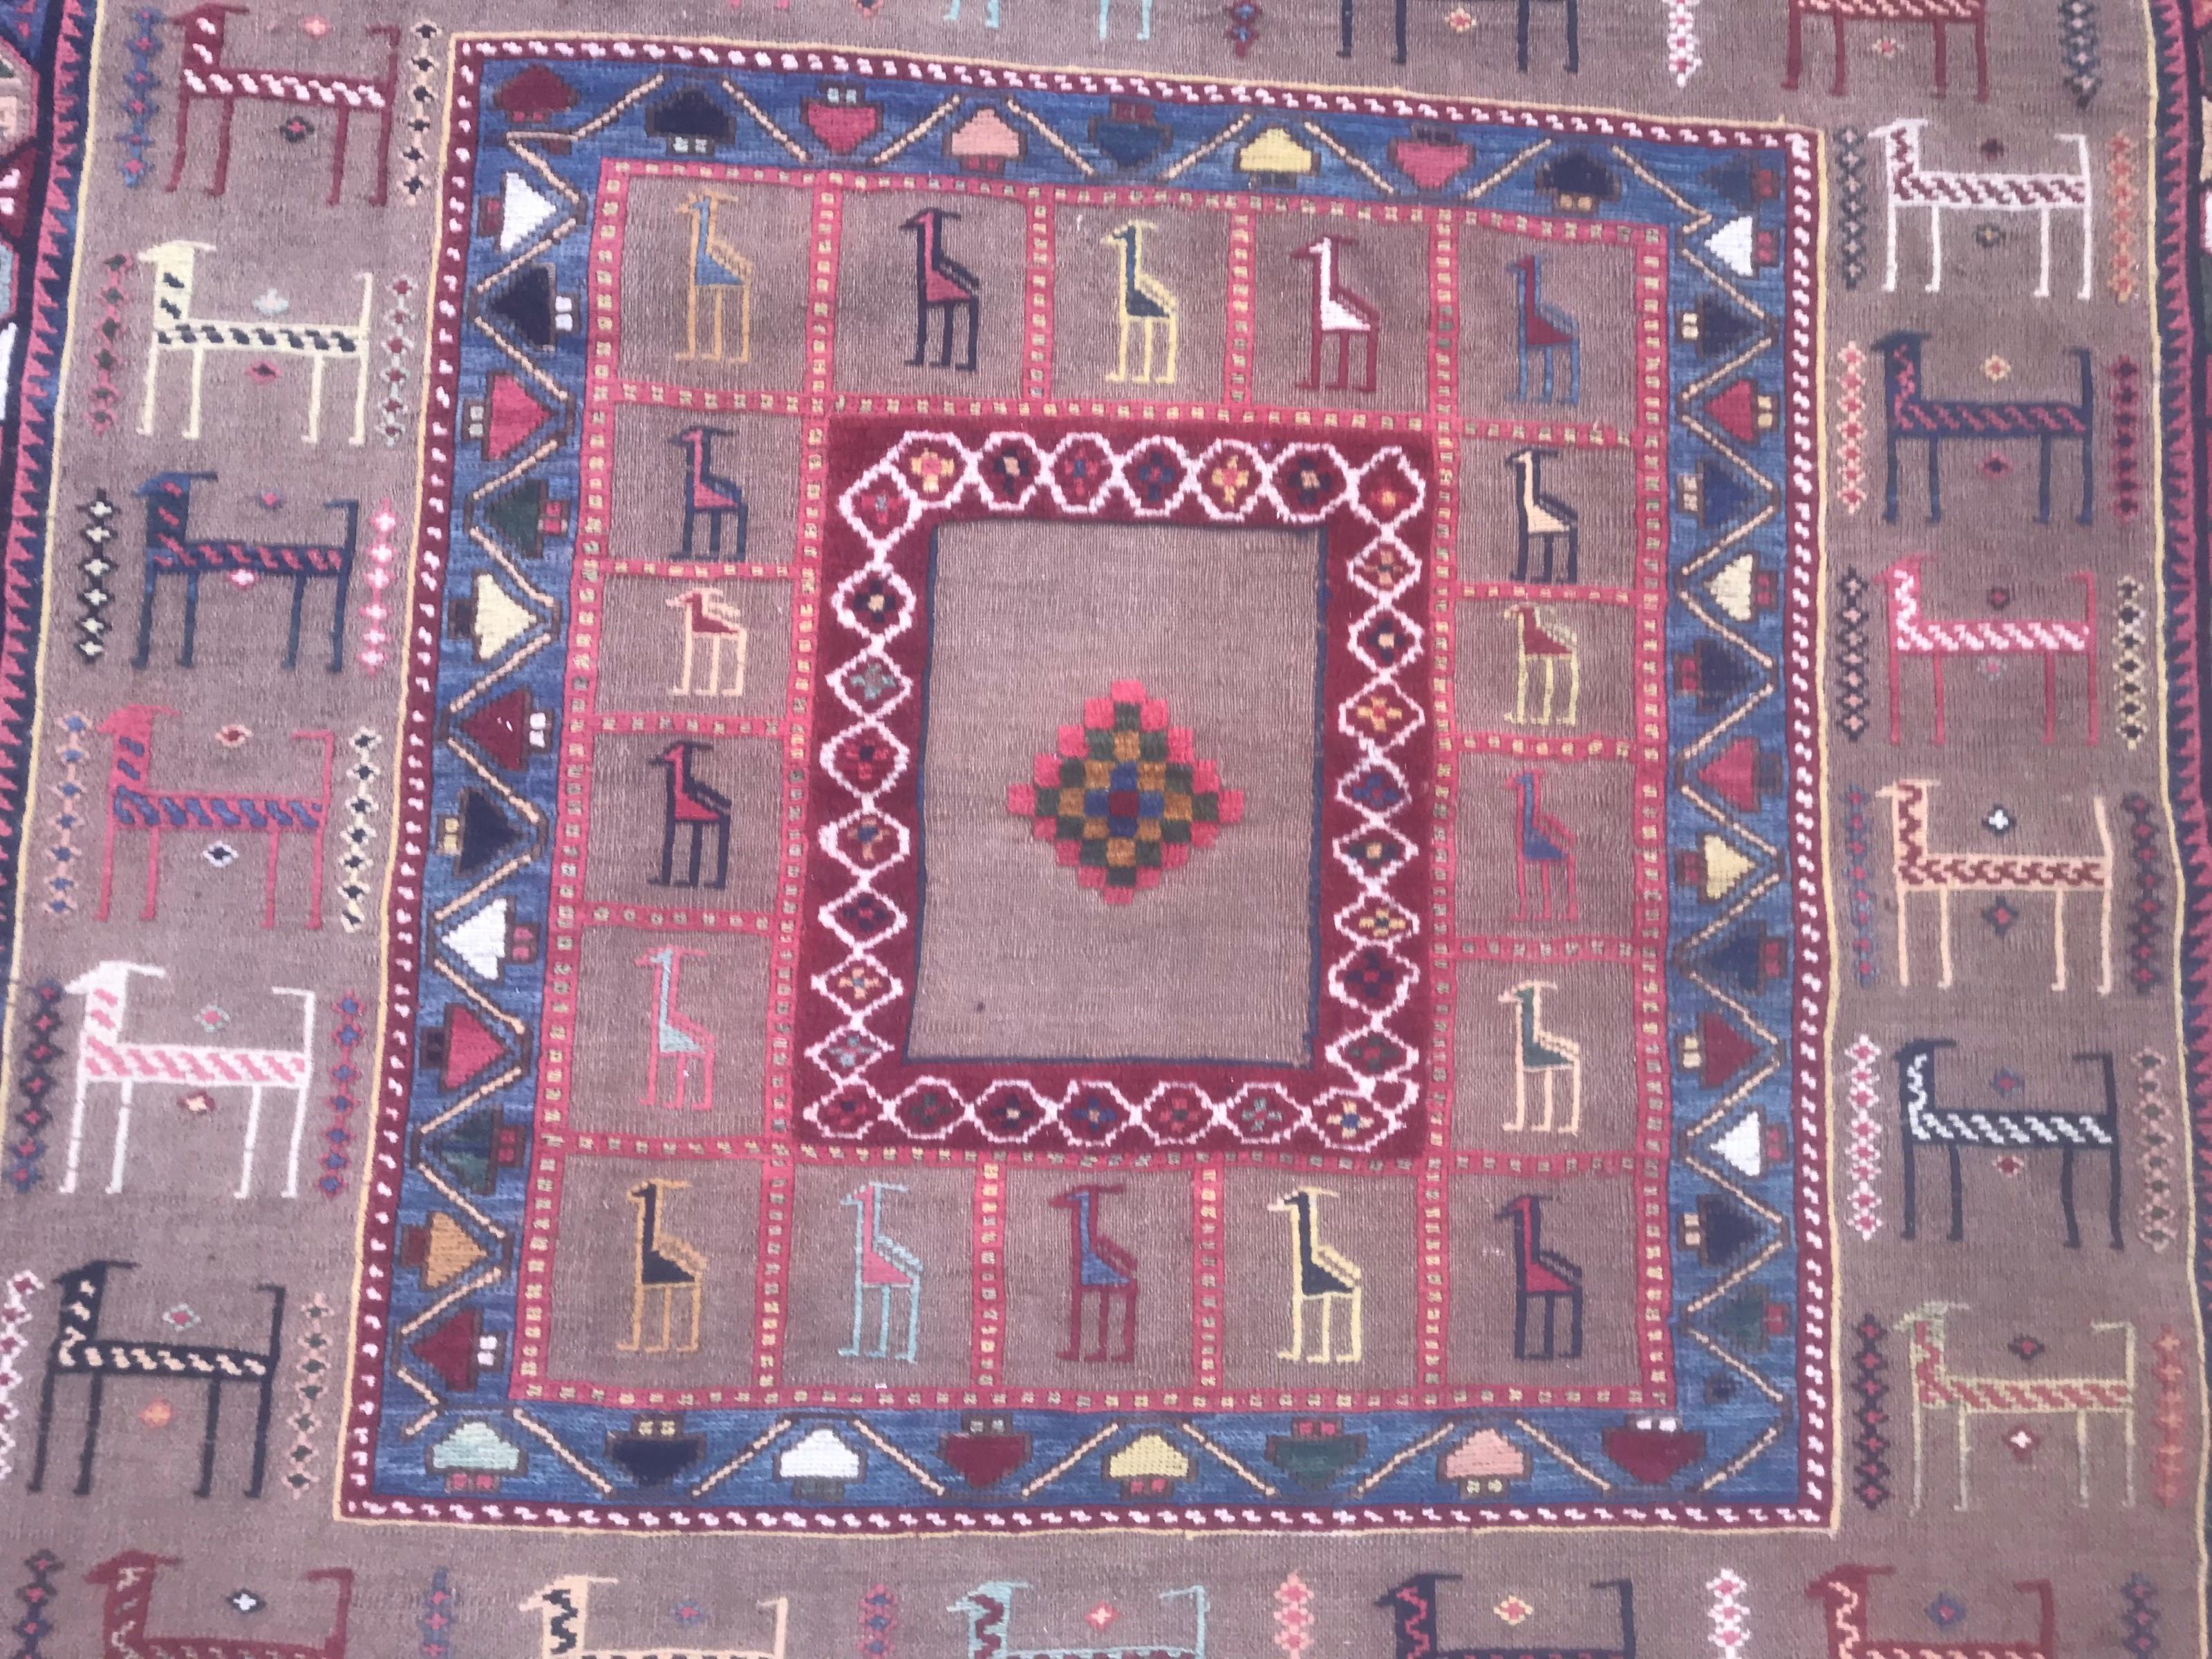 Nice late 20th century shahsavand embroidered Kilim with Sumak method at designed parts and simple woven method on field, with a beautiful tribal design and nice colors with a grey field, pink, blue, green, orange and purple, entirely hand